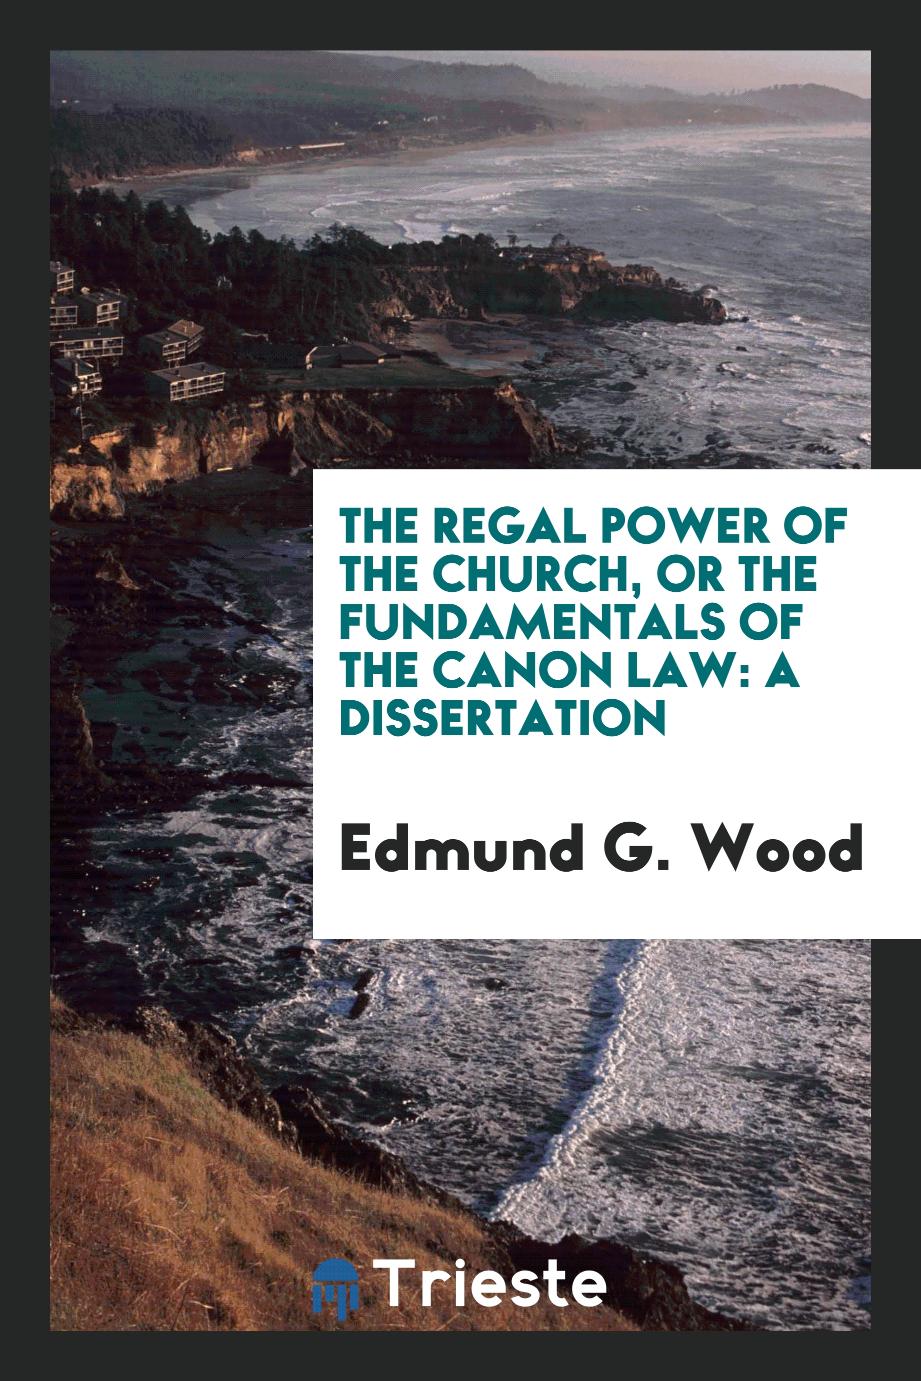 The Regal Power of the Church, or the Fundamentals of the Canon Law: A Dissertation